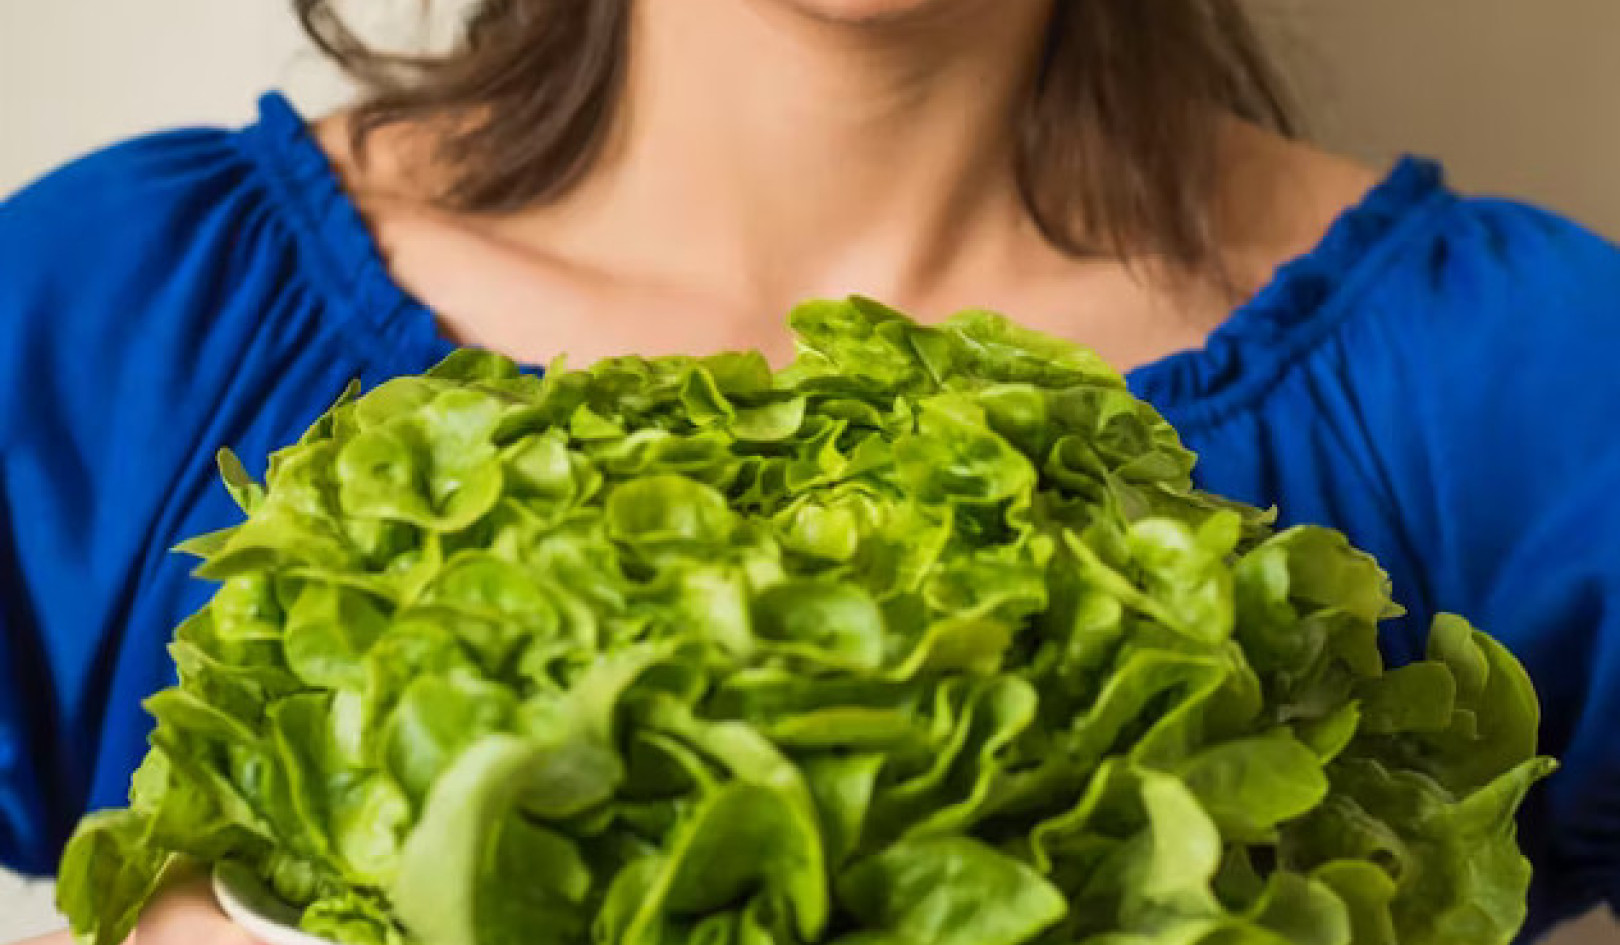 Leafy Greens: Nature's Answer to Better Dental Health